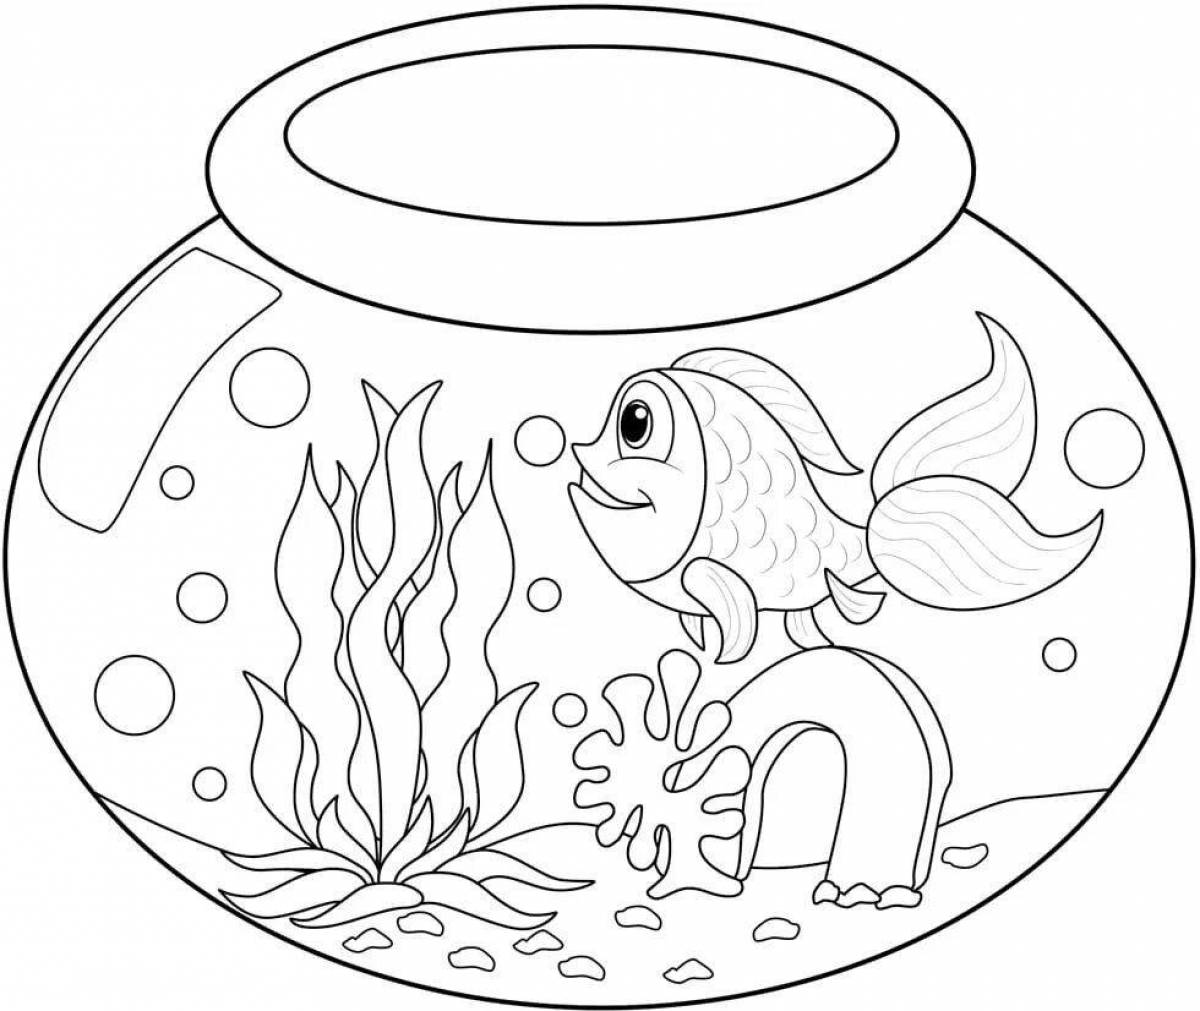 Glittering aquarium fish coloring book for 5-6 year olds